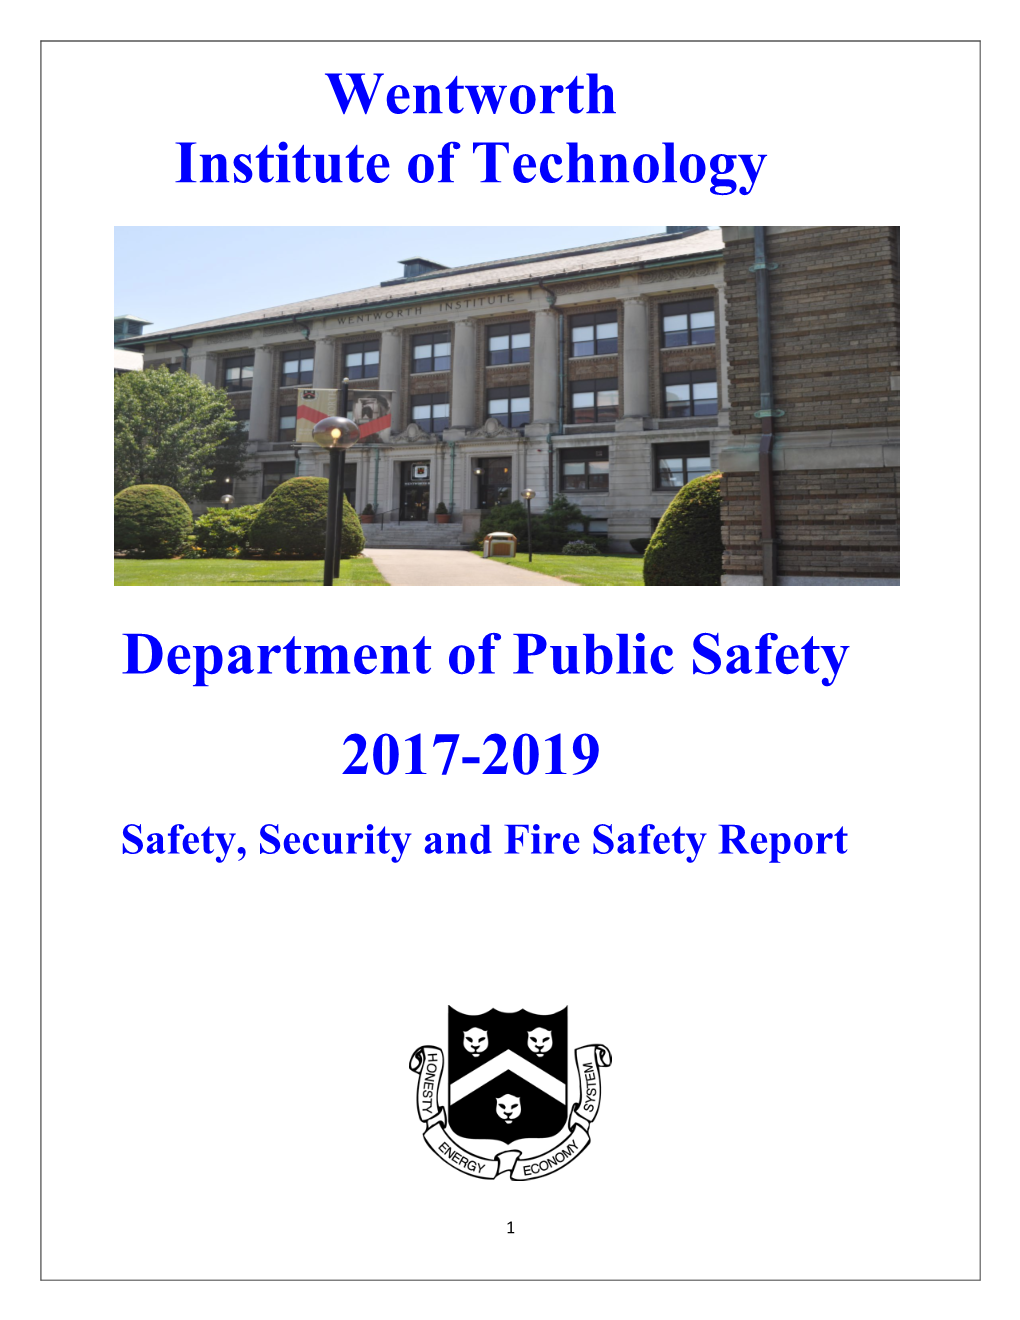 Wentworth Institute of Technology Department of Public Safety 2017